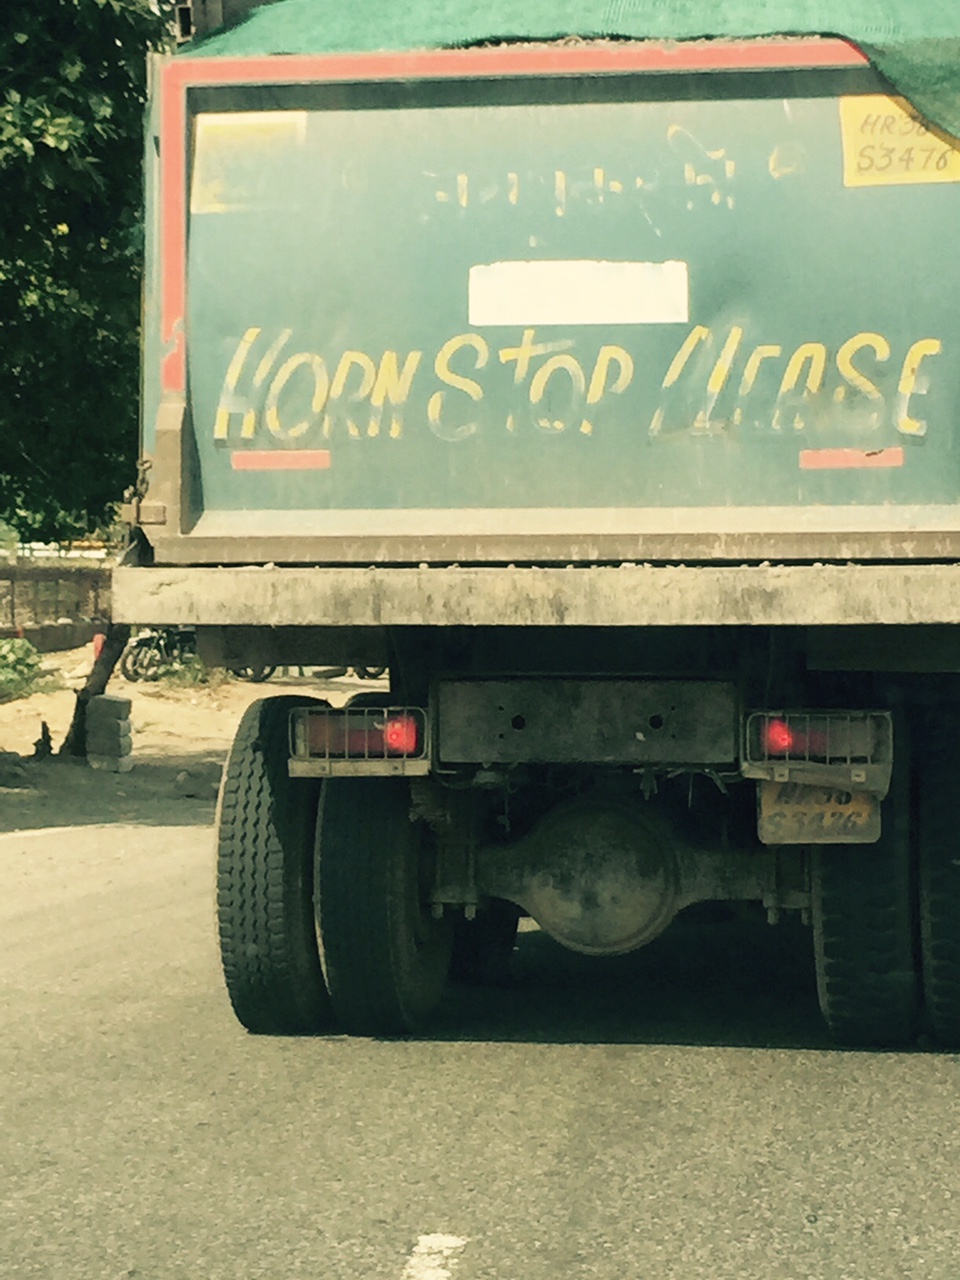 Trucks cutting through Delhi insist that you honk be it day or night (this one is from the state of Haryana).